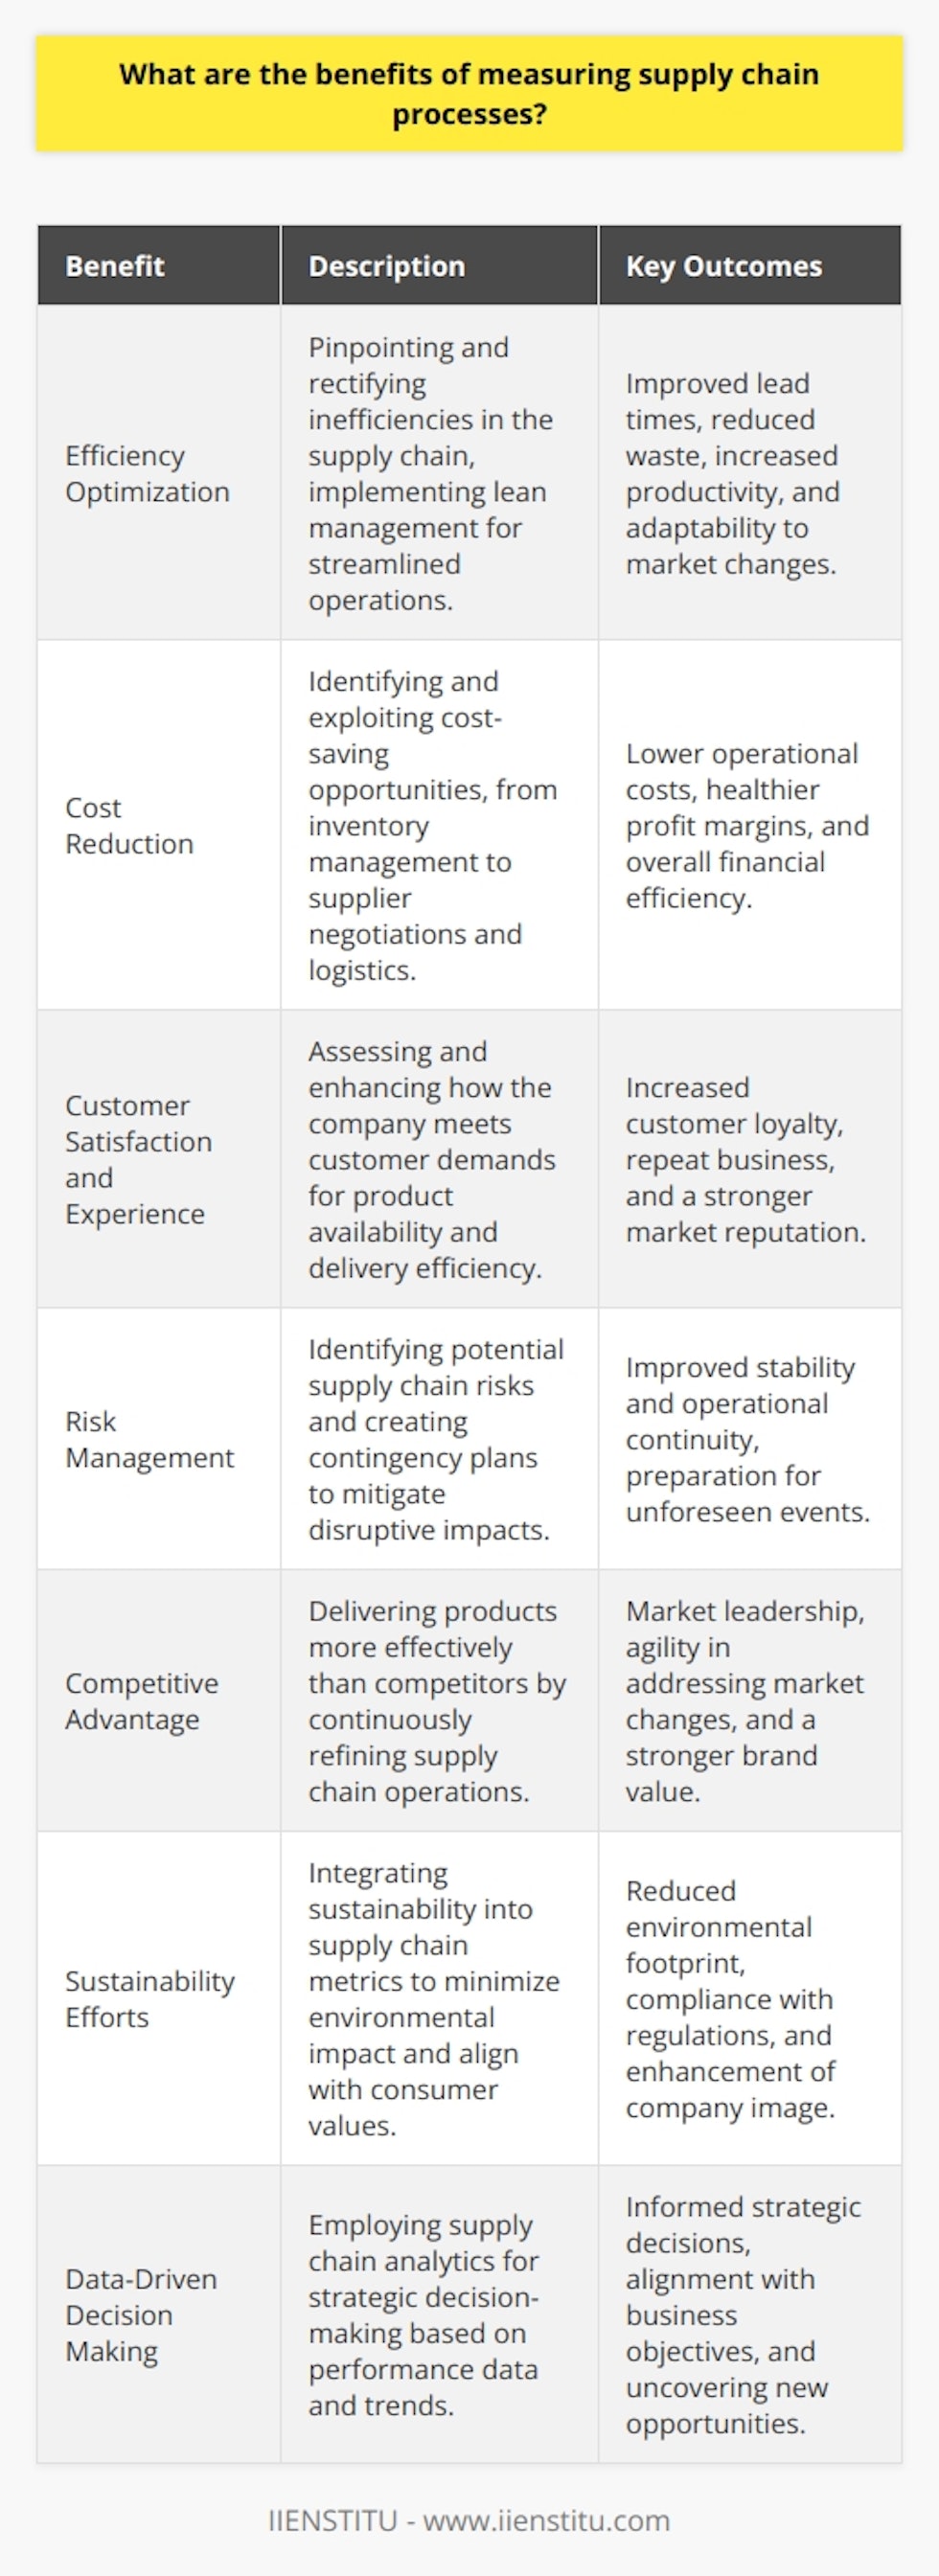 Supply chain processes form the backbone of any manufacturing and distribution business, and their measurement is crucial in understanding the effectiveness of the company's operations. In an increasingly competitive environment, it's even more essential to refine these processes for a well-oiled supply chain system. Here's a deeper look into the specific benefits of measuring supply chain processes.**Efficiency Optimization**Measuring supply chain processes enables companies to pinpoint inefficiencies – whether it’s the time taken for inventory turnaround or the speed of product delivery. By conducting a thorough analysis of each step in their supply chain, organizations can implement lean management techniques to streamline operations, minimize waste, improve lead times, and ultimately enhance productivity. Regular monitoring ensures continuous improvement, adapting processes to changing market conditions or operational bottlenecks.**Cost Reduction**Closely linked to efficiency is cost management. Understanding each aspect of the supply chain allows organizations to identify cost-saving opportunities. This can be anything from reducing excess inventory that ties up capital, to renegotiating supplier contracts, or optimizing transportation routes to cut fuel costs. By regular measurement and management, businesses can maintain a cost-effective supply chain that supports healthy margins.**Customer Satisfaction and Experience**In today's fast-paced world, customers demand quick and reliable service. Measuring supply chain processes entails assessing how well a company is meeting customer demands. By evaluating delivery times, product availability, and return policies, among other metrics, a business can enhance its customer experience. A well-measured supply chain ensures products are available when and where they are needed, increasing customer loyalty and satisfaction.**Risk Management**A robust measurement strategy includes risk assessment and management. By analyzing the supply chain, companies can identify potential risks – from supplier reliability to risks associated with geopolitical issues that might disrupt the supply chain. This proactive approach allows businesses to create contingency plans to mitigate risks, ensuring stability and continuity in operations.**Competitive Advantage**Companies that excel in measuring and managing their supply chain set themselves apart from competitors. This competitive advantage comes from being able to deliver products more efficiently and cost-effectively while maintaining high quality. By continuously refining supply chain processes, a company can respond faster to market changes, adapt to new trends, and meet customer needs more effectively than competitors.**Sustainability Efforts**Modern supply chain measurement often includes sustainability metrics. Companies are increasingly held accountable for their environmental footprint, and a thorough measurement of supply chain processes can help identify ways to minimize waste, reduce energy consumption, and ensure ethical practices throughout the chain. Sustainable supply chains not only benefit the environment but also meet the growing demand from consumers for responsible business practices.**Data-Driven Decision Making**Supply chain analytics empower enterprises with valuable data to support strategic decision-making. By measuring performance, companies collect data that can reveal trends, patterns, and insights that might otherwise go unnoticed. In-depth analysis of this data leads to informed decisions that align with the overall business strategy and objectives.In conclusion, measuring supply chain processes is fundamentally about understanding and optimizing the journey of a product from raw material to end consumer. It is an ongoing commitment that delivers various key benefits, from operational and financial improvements to enhancing consumer relationships and building a resilient, sustainable business. As industries evolve, companies that continuously measure and refine their supply chain processes undoubtedly remain ahead in their respective markets.